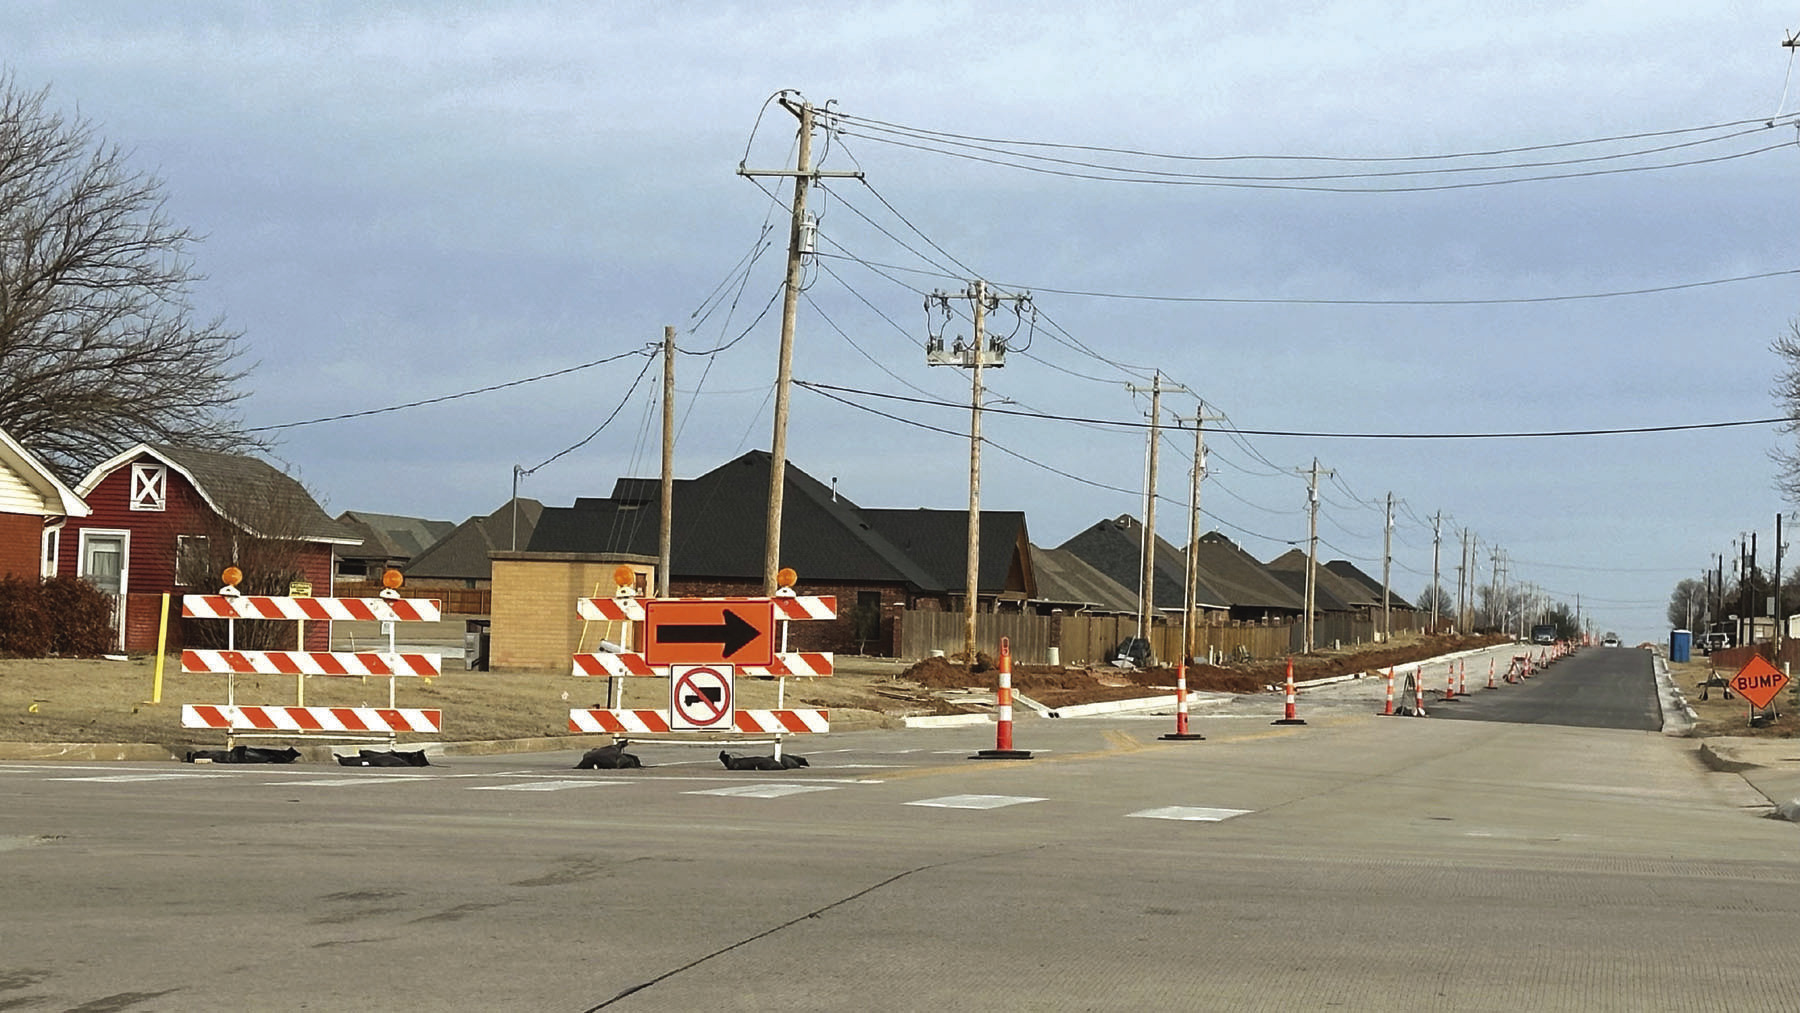 ◄ Economic Developer of Weatherford, Yolanda Cresswell told Kiwanis members this week the Lyle Road project should be completed in April. Tyler Bryson/WDN